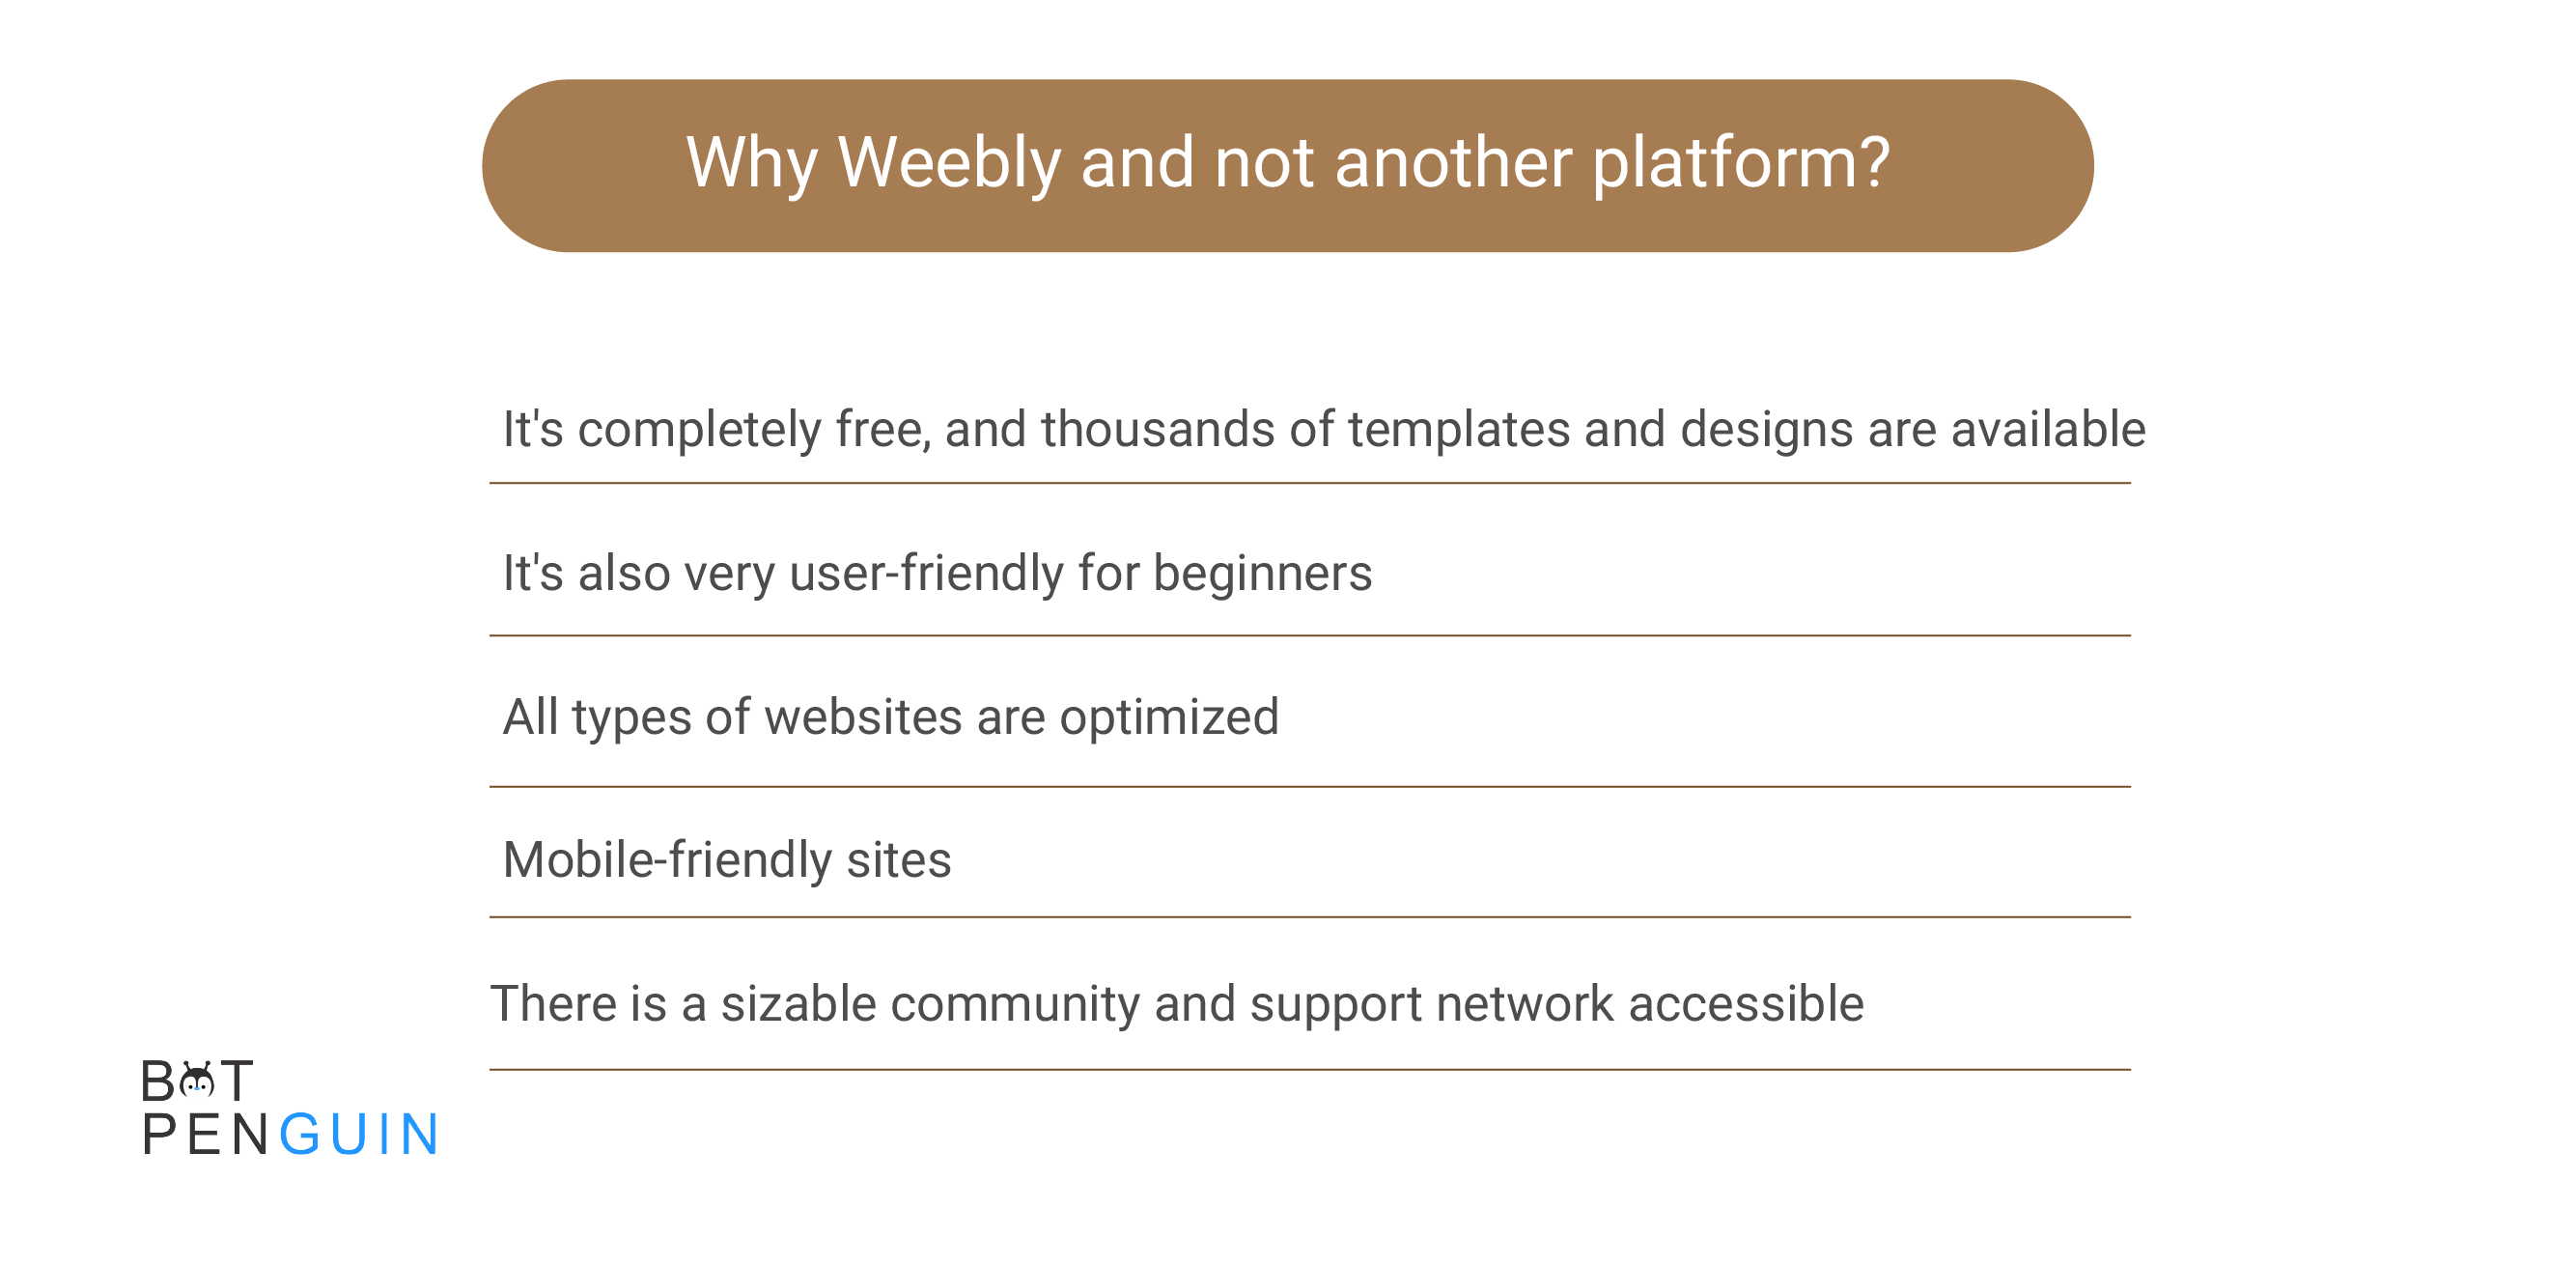 Why Weebly and not another platform?